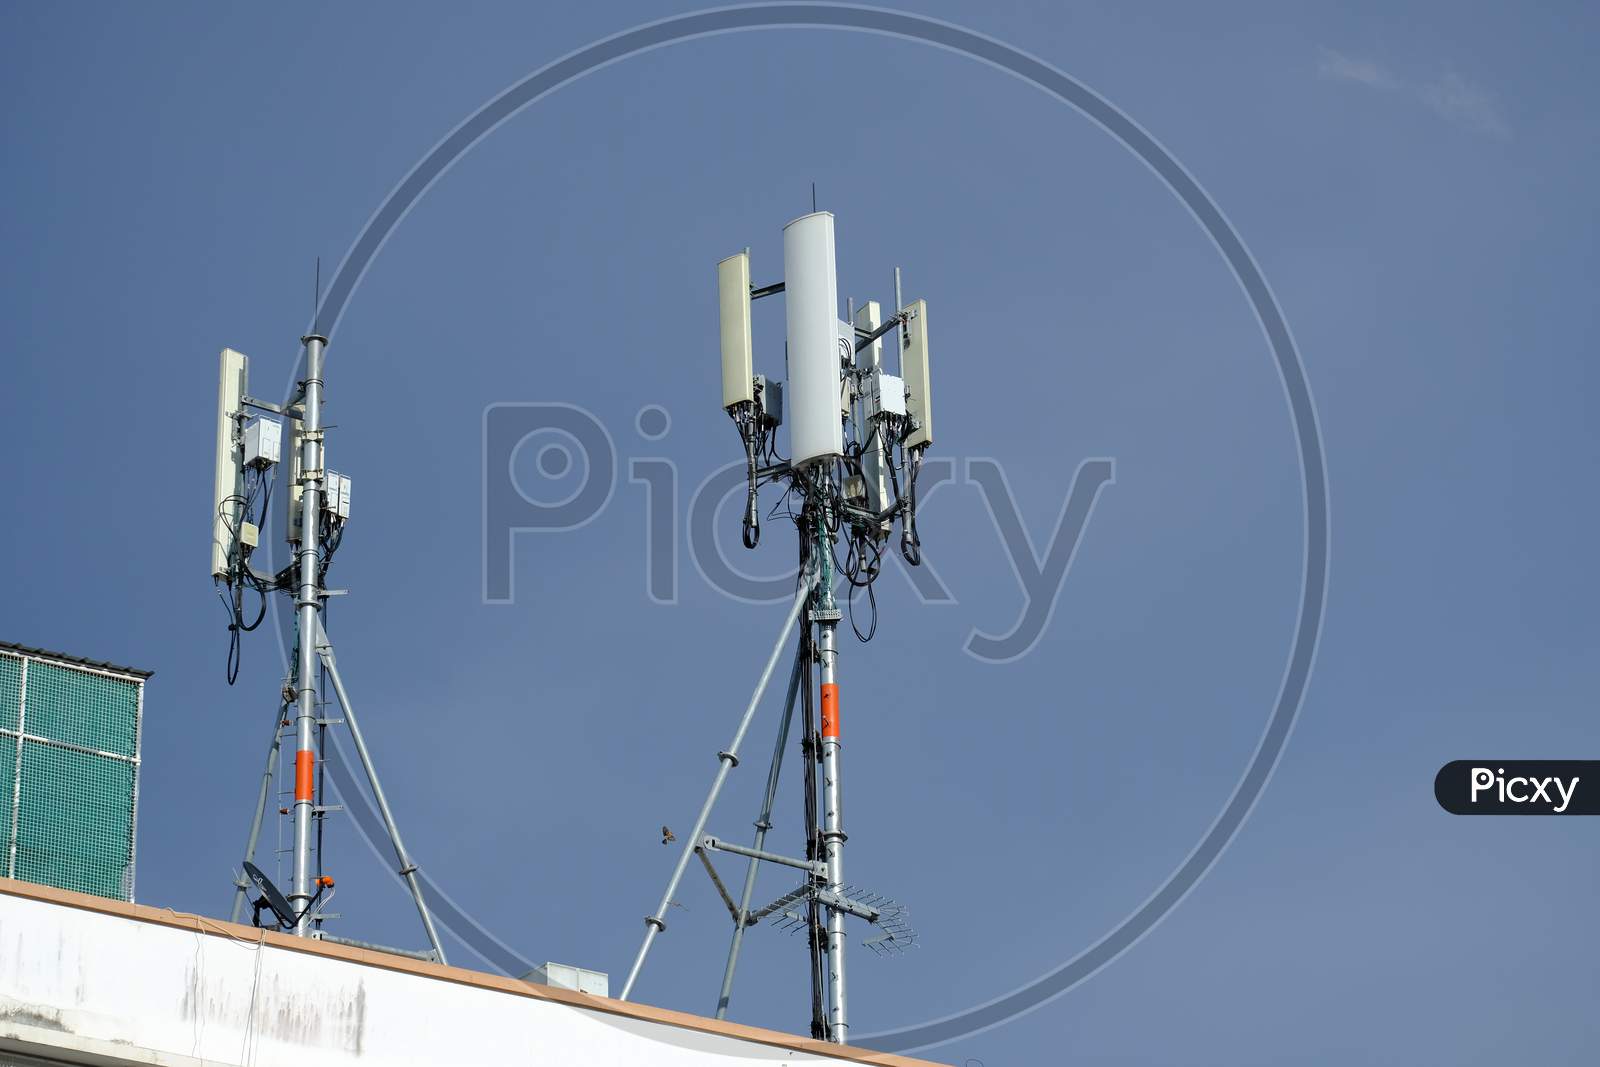 Telecommunication Pole Of 3G, 4G, 5G Cellular Antenna, Small Cell Site Base Station On The Rooftop Of The Building